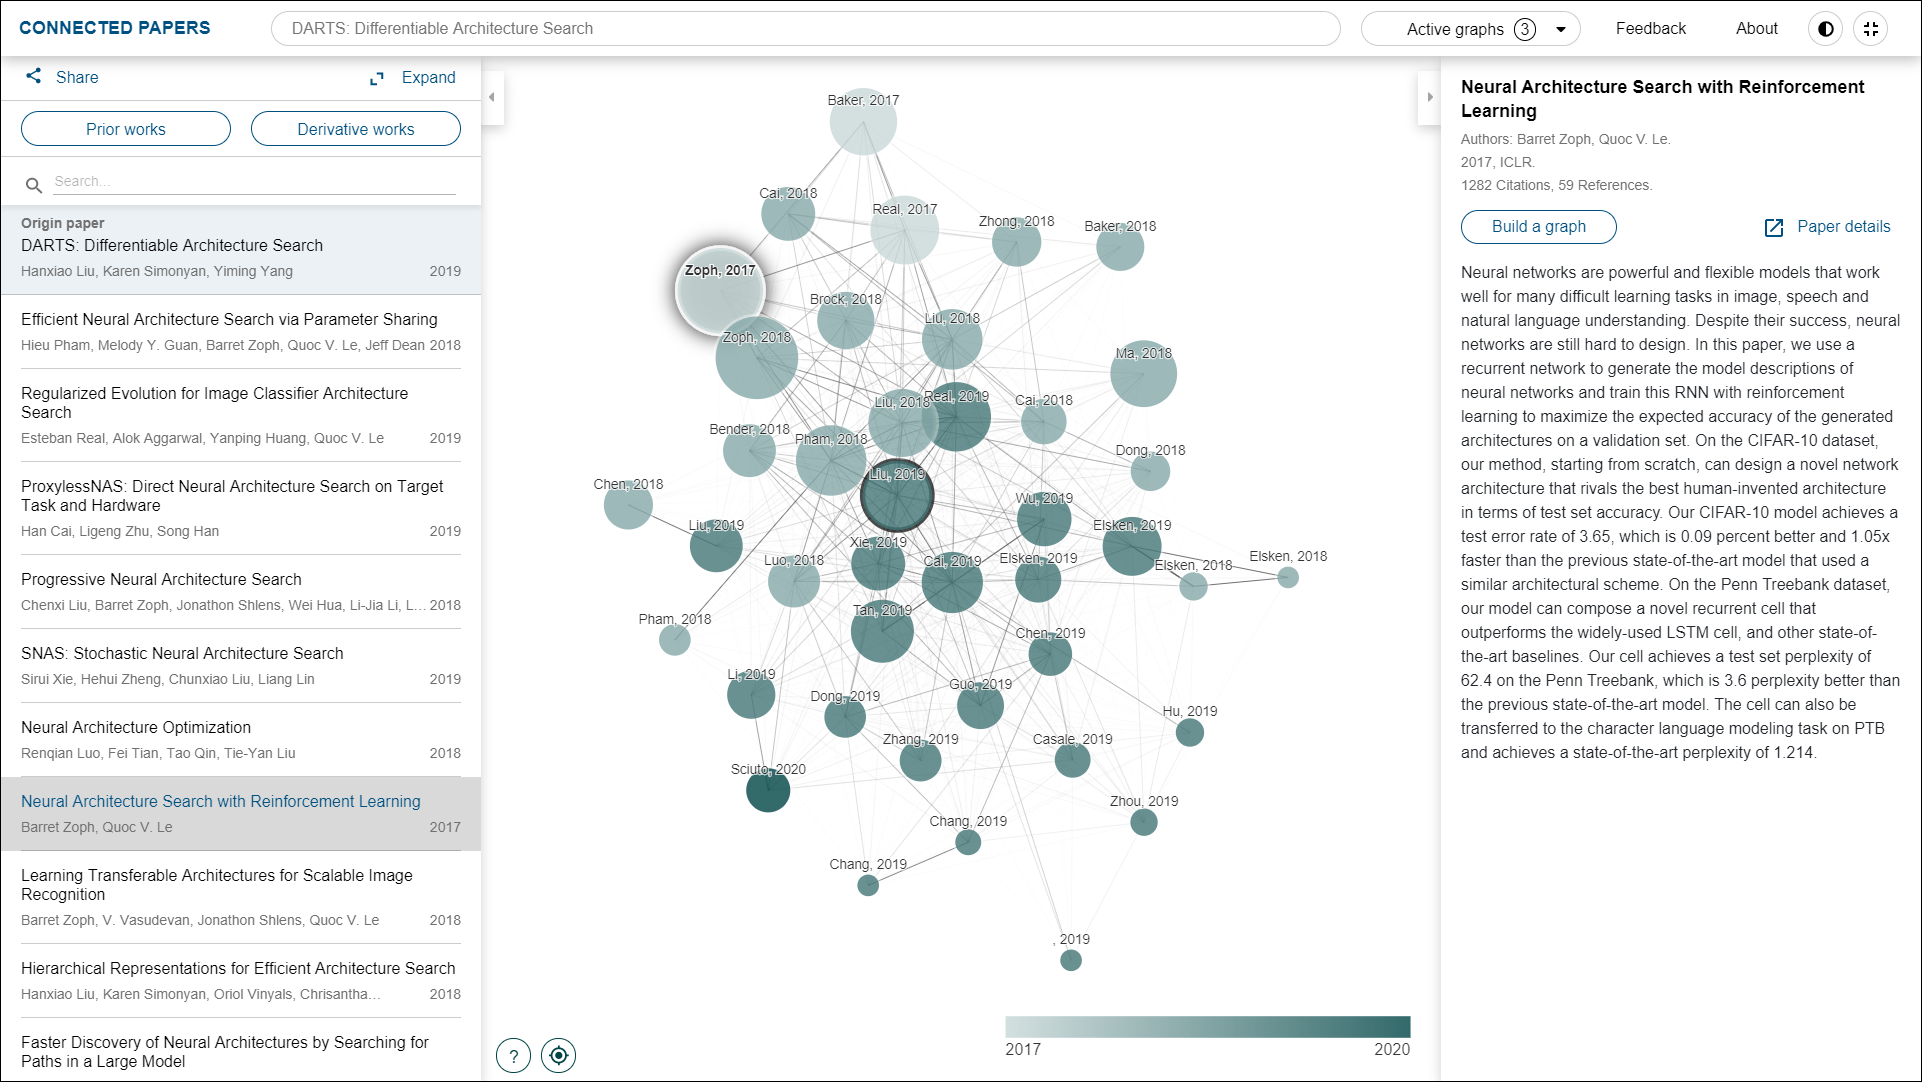 Announcing Connected Papers — a visual tool for researchers to find and  explore academic papers, by Eddie Smolyansky, Connected Papers